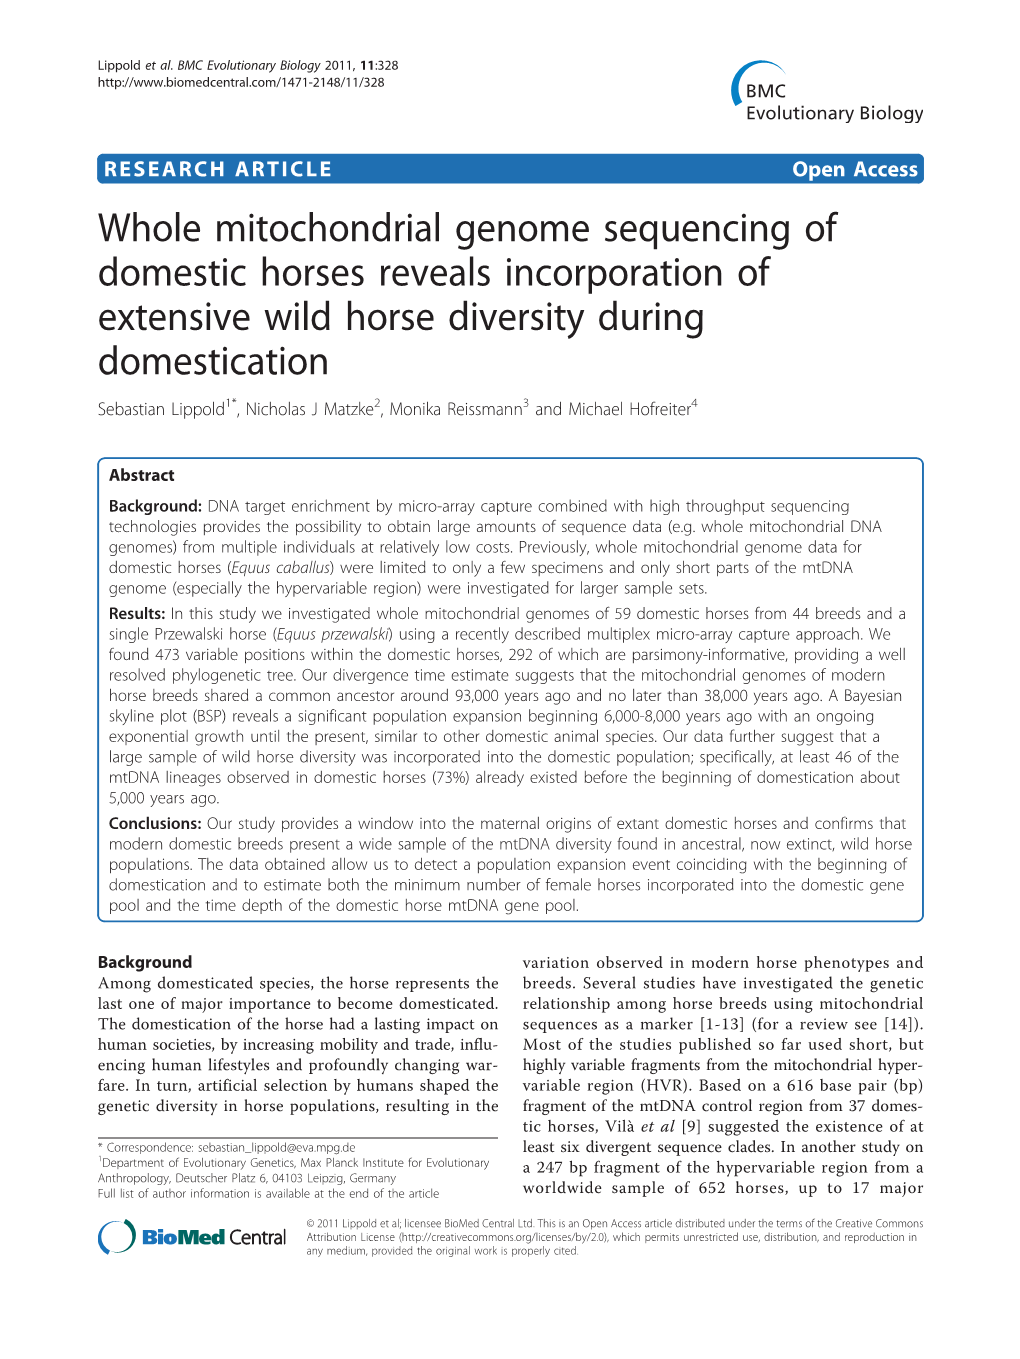 Whole Mitochondrial Genome Sequencing of Domestic Horses